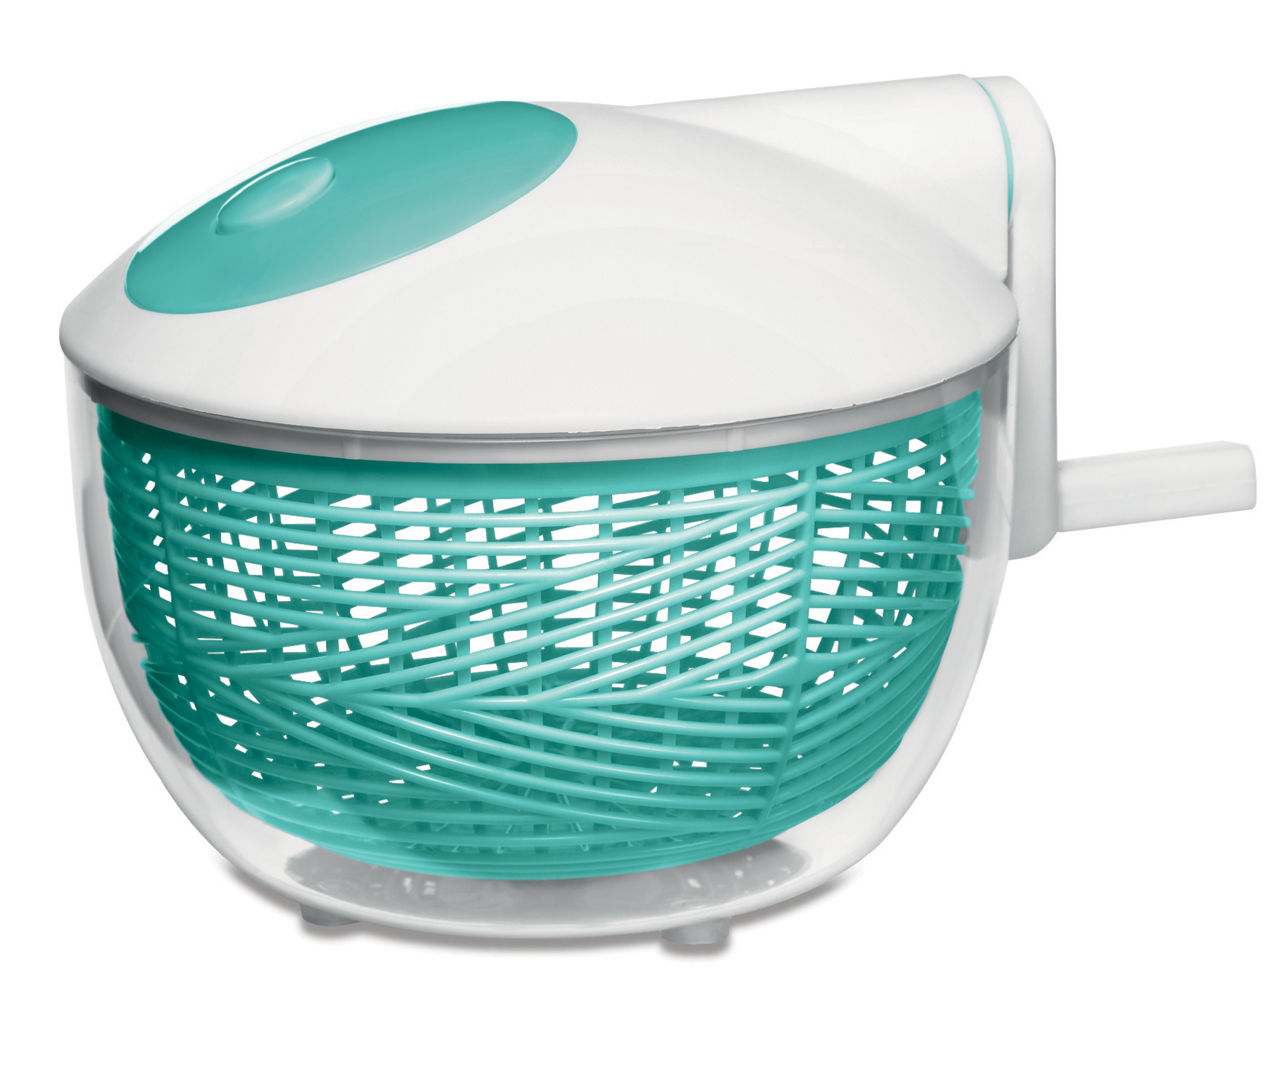 You Can Use This Common Household Item If You Don't Own A Salad Spinner